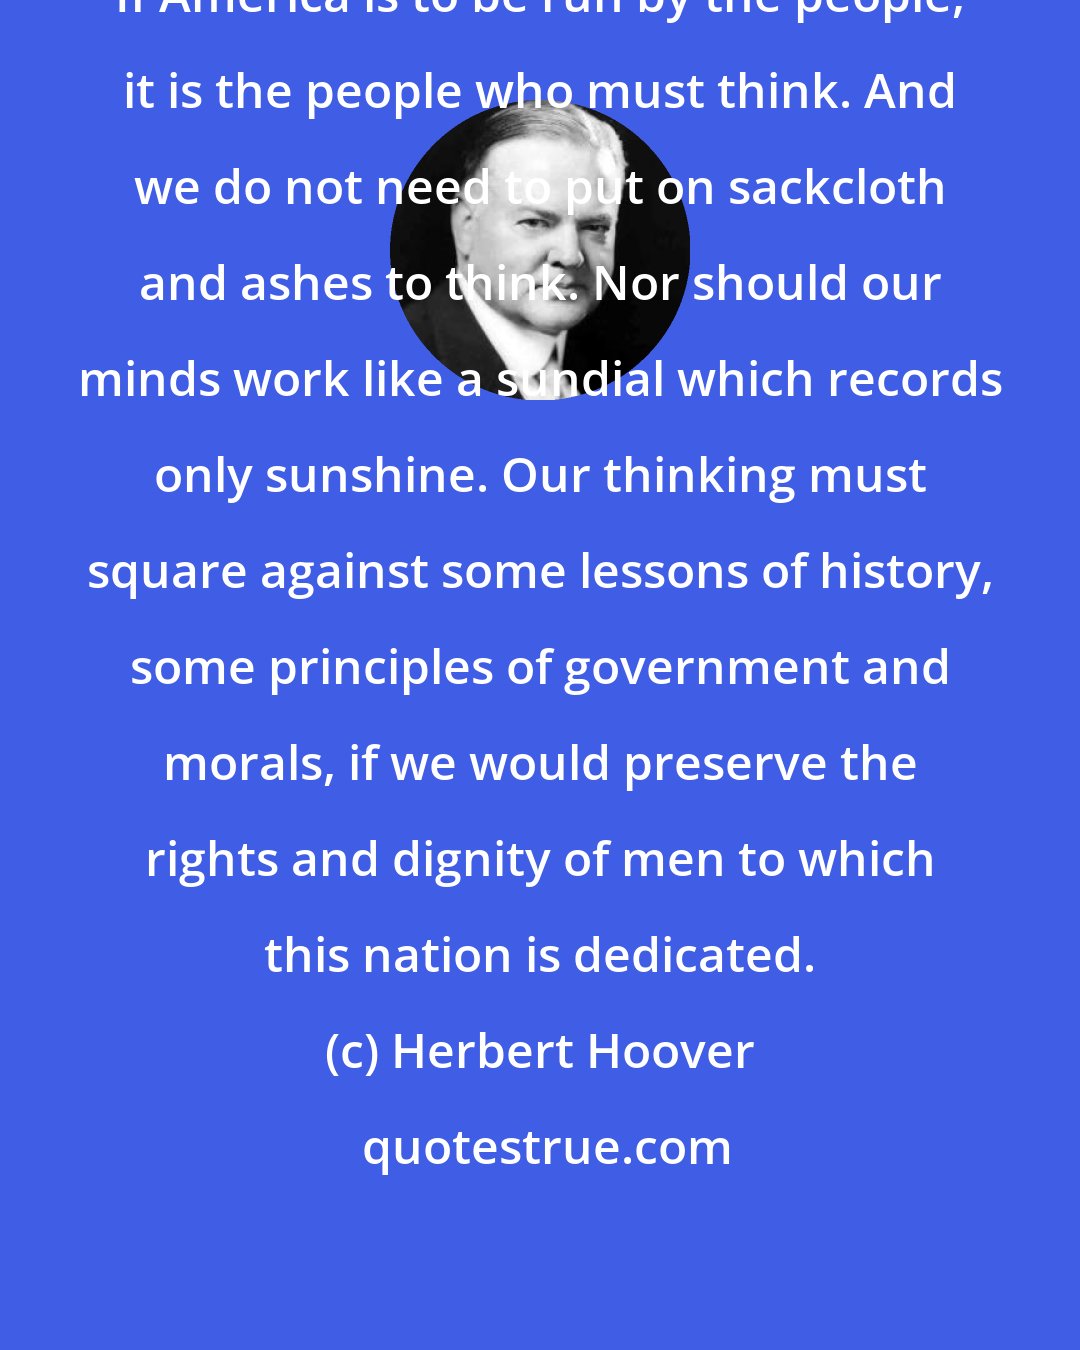 Herbert Hoover: If America is to be run by the people, it is the people who must think. And we do not need to put on sackcloth and ashes to think. Nor should our minds work like a sundial which records only sunshine. Our thinking must square against some lessons of history, some principles of government and morals, if we would preserve the rights and dignity of men to which this nation is dedicated.